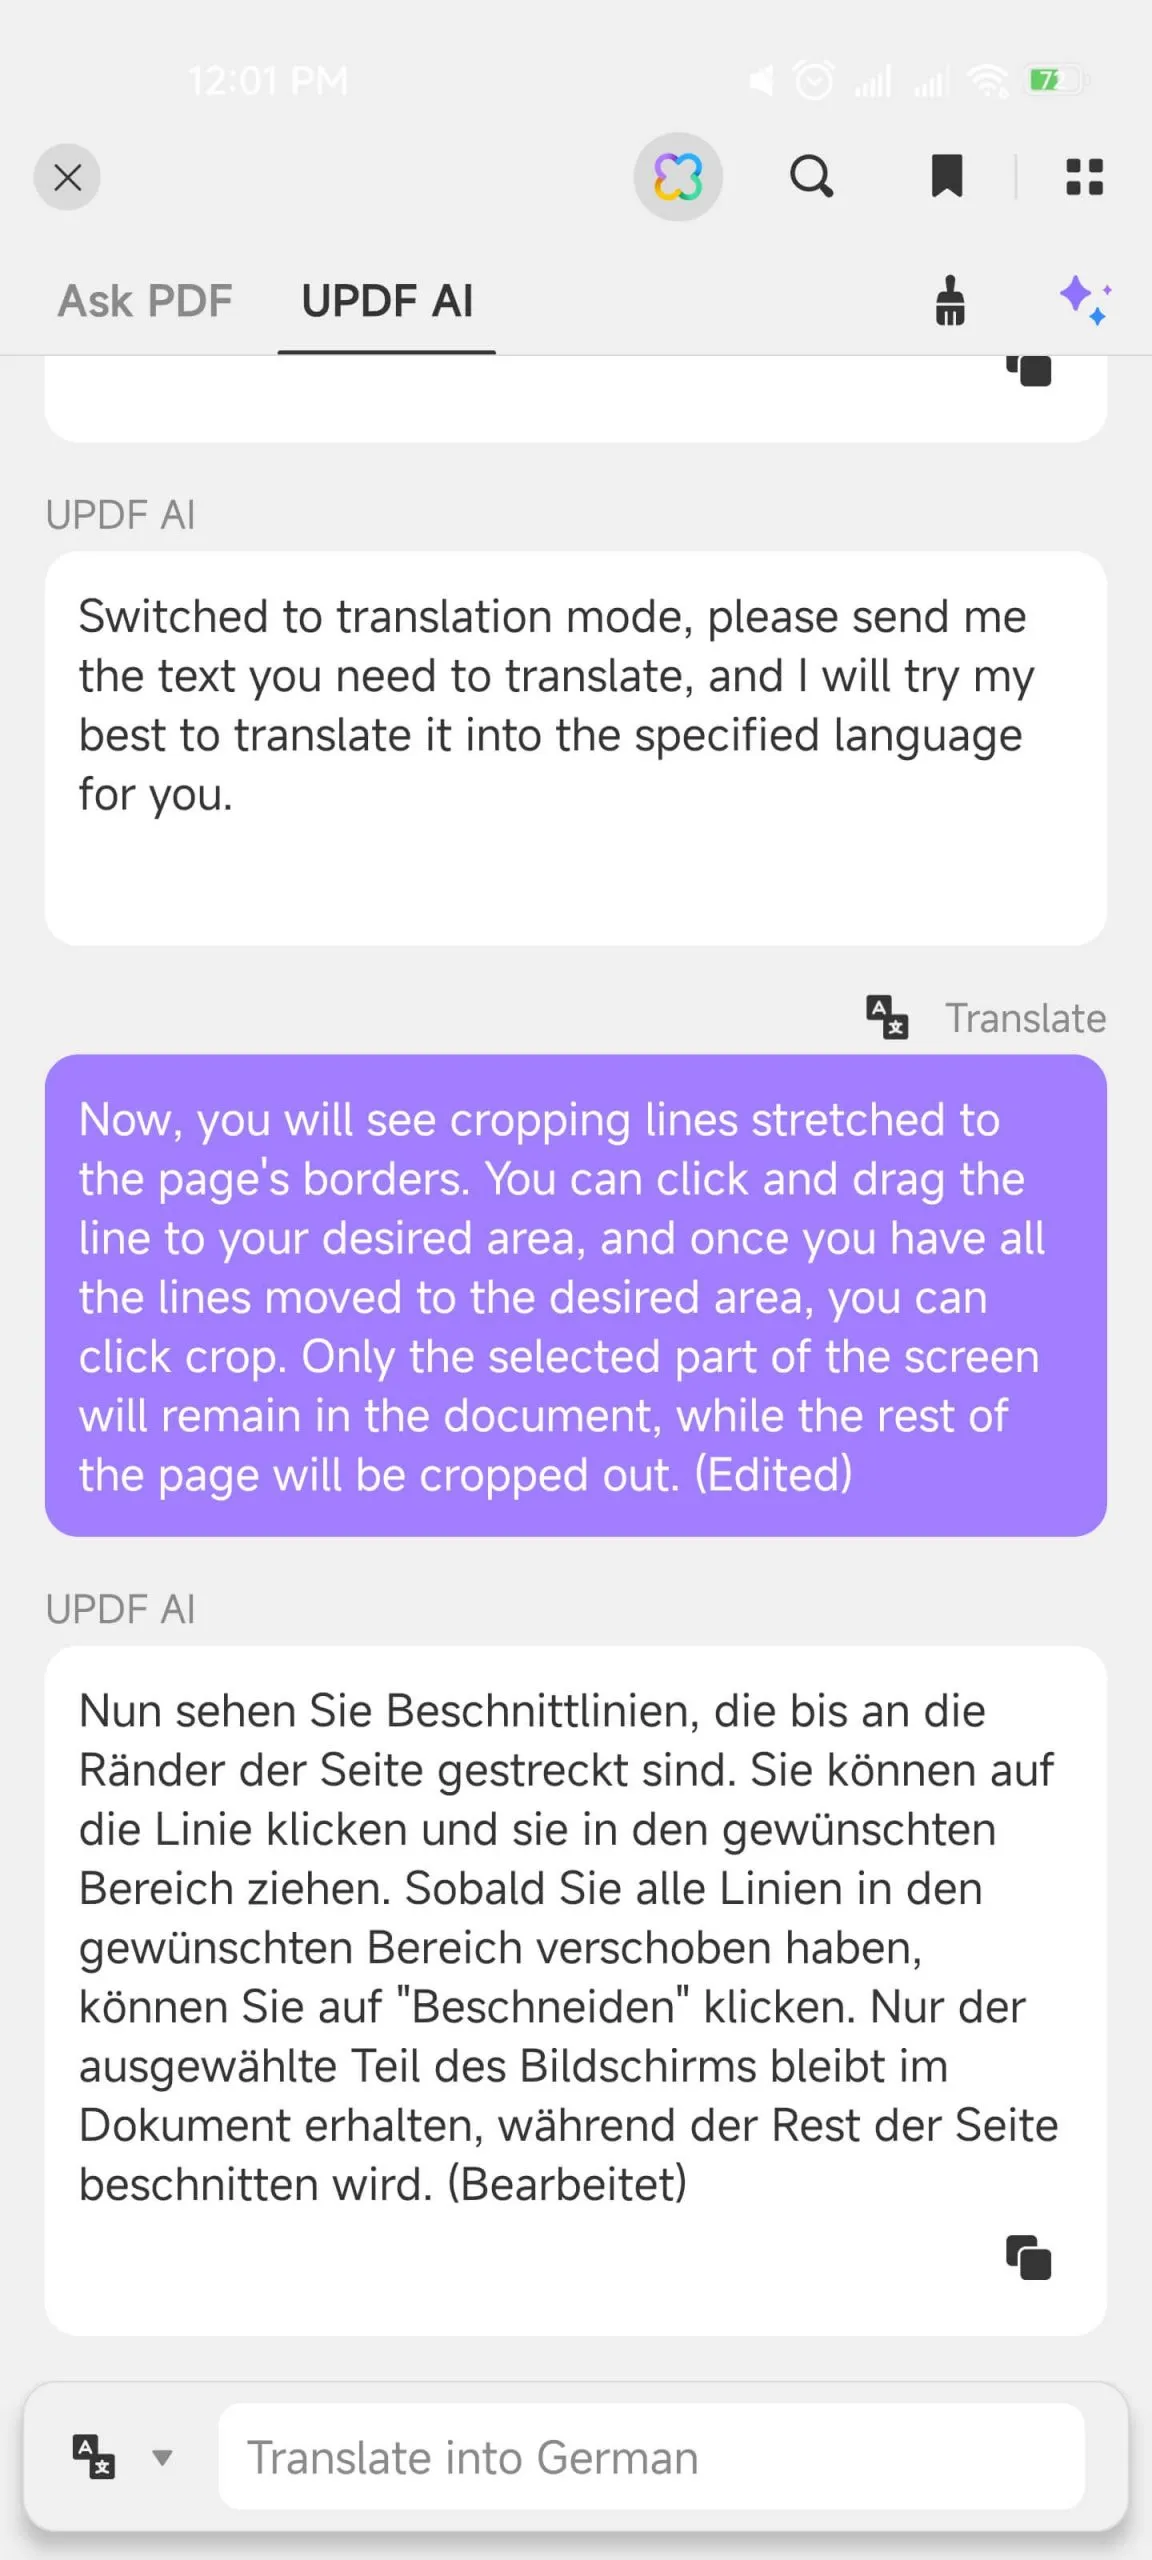 Translate with UPDF AI chat